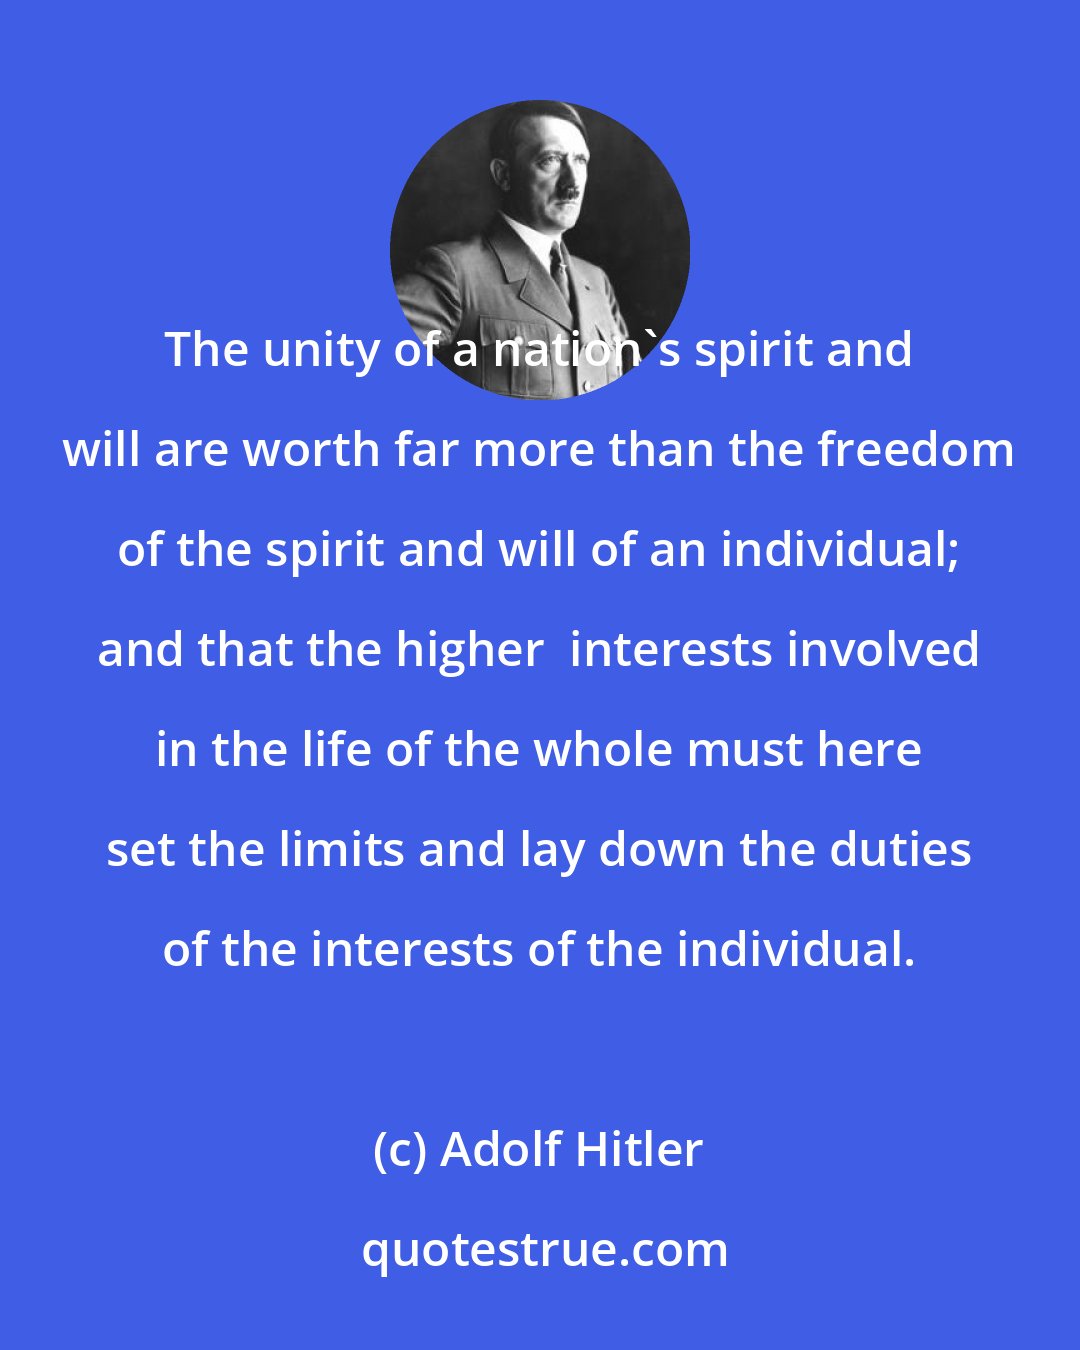 Adolf Hitler: The unity of a nation's spirit and will are worth far more than the freedom of the spirit and will of an individual; and that the higher  interests involved in the life of the whole must here set the limits and lay down the duties of the interests of the individual.